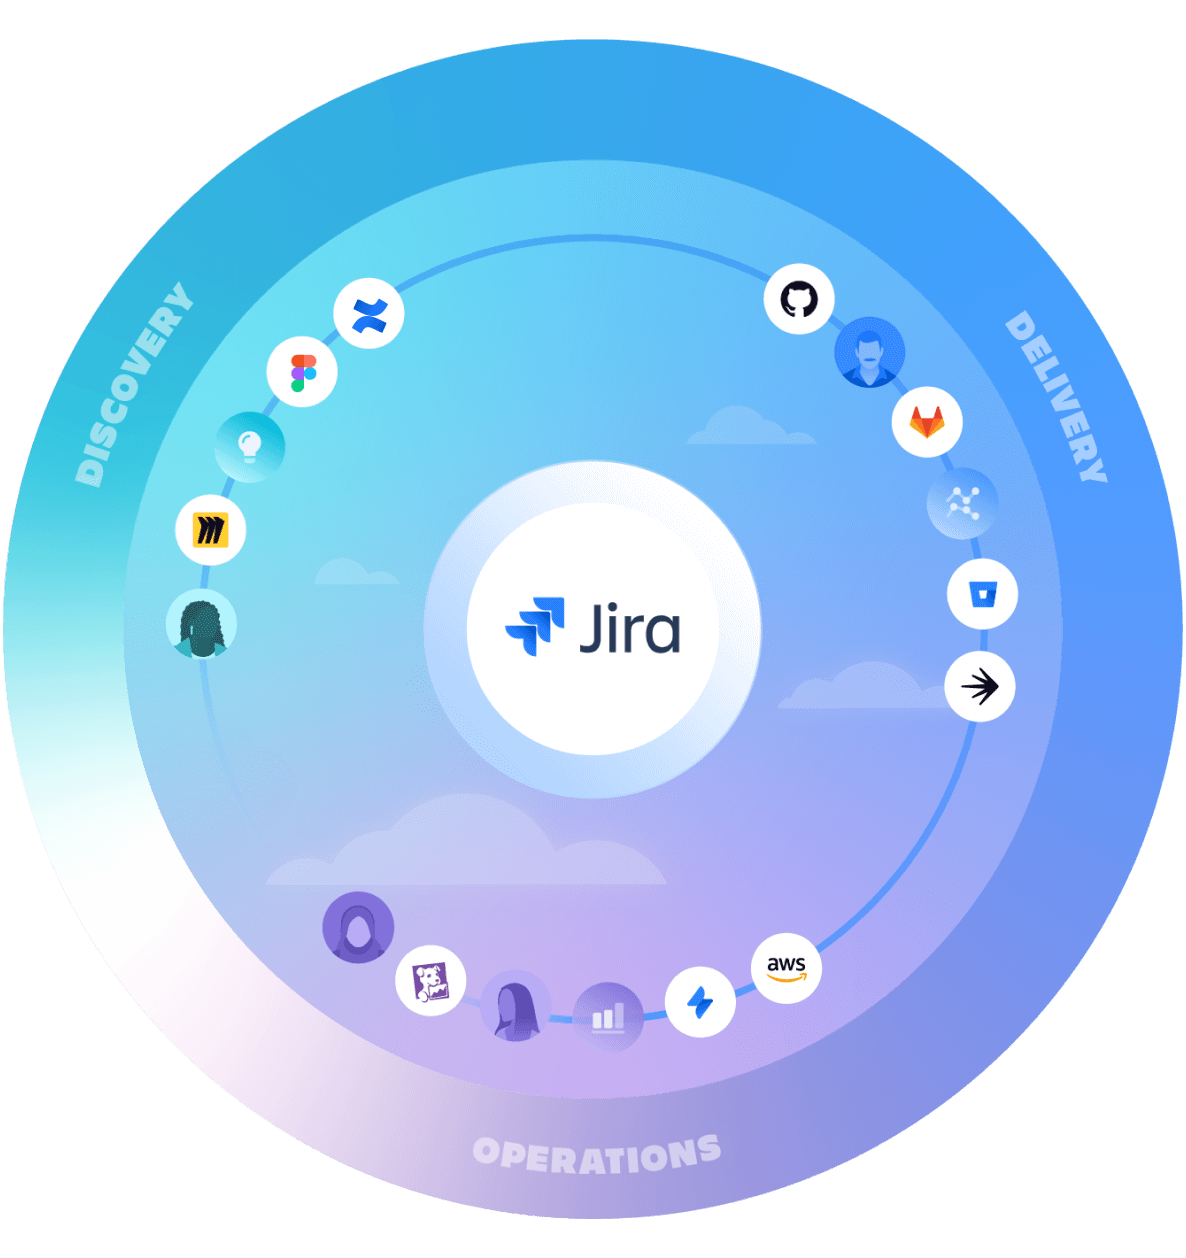 Circular image showing product logos surrounding Jira in the middle